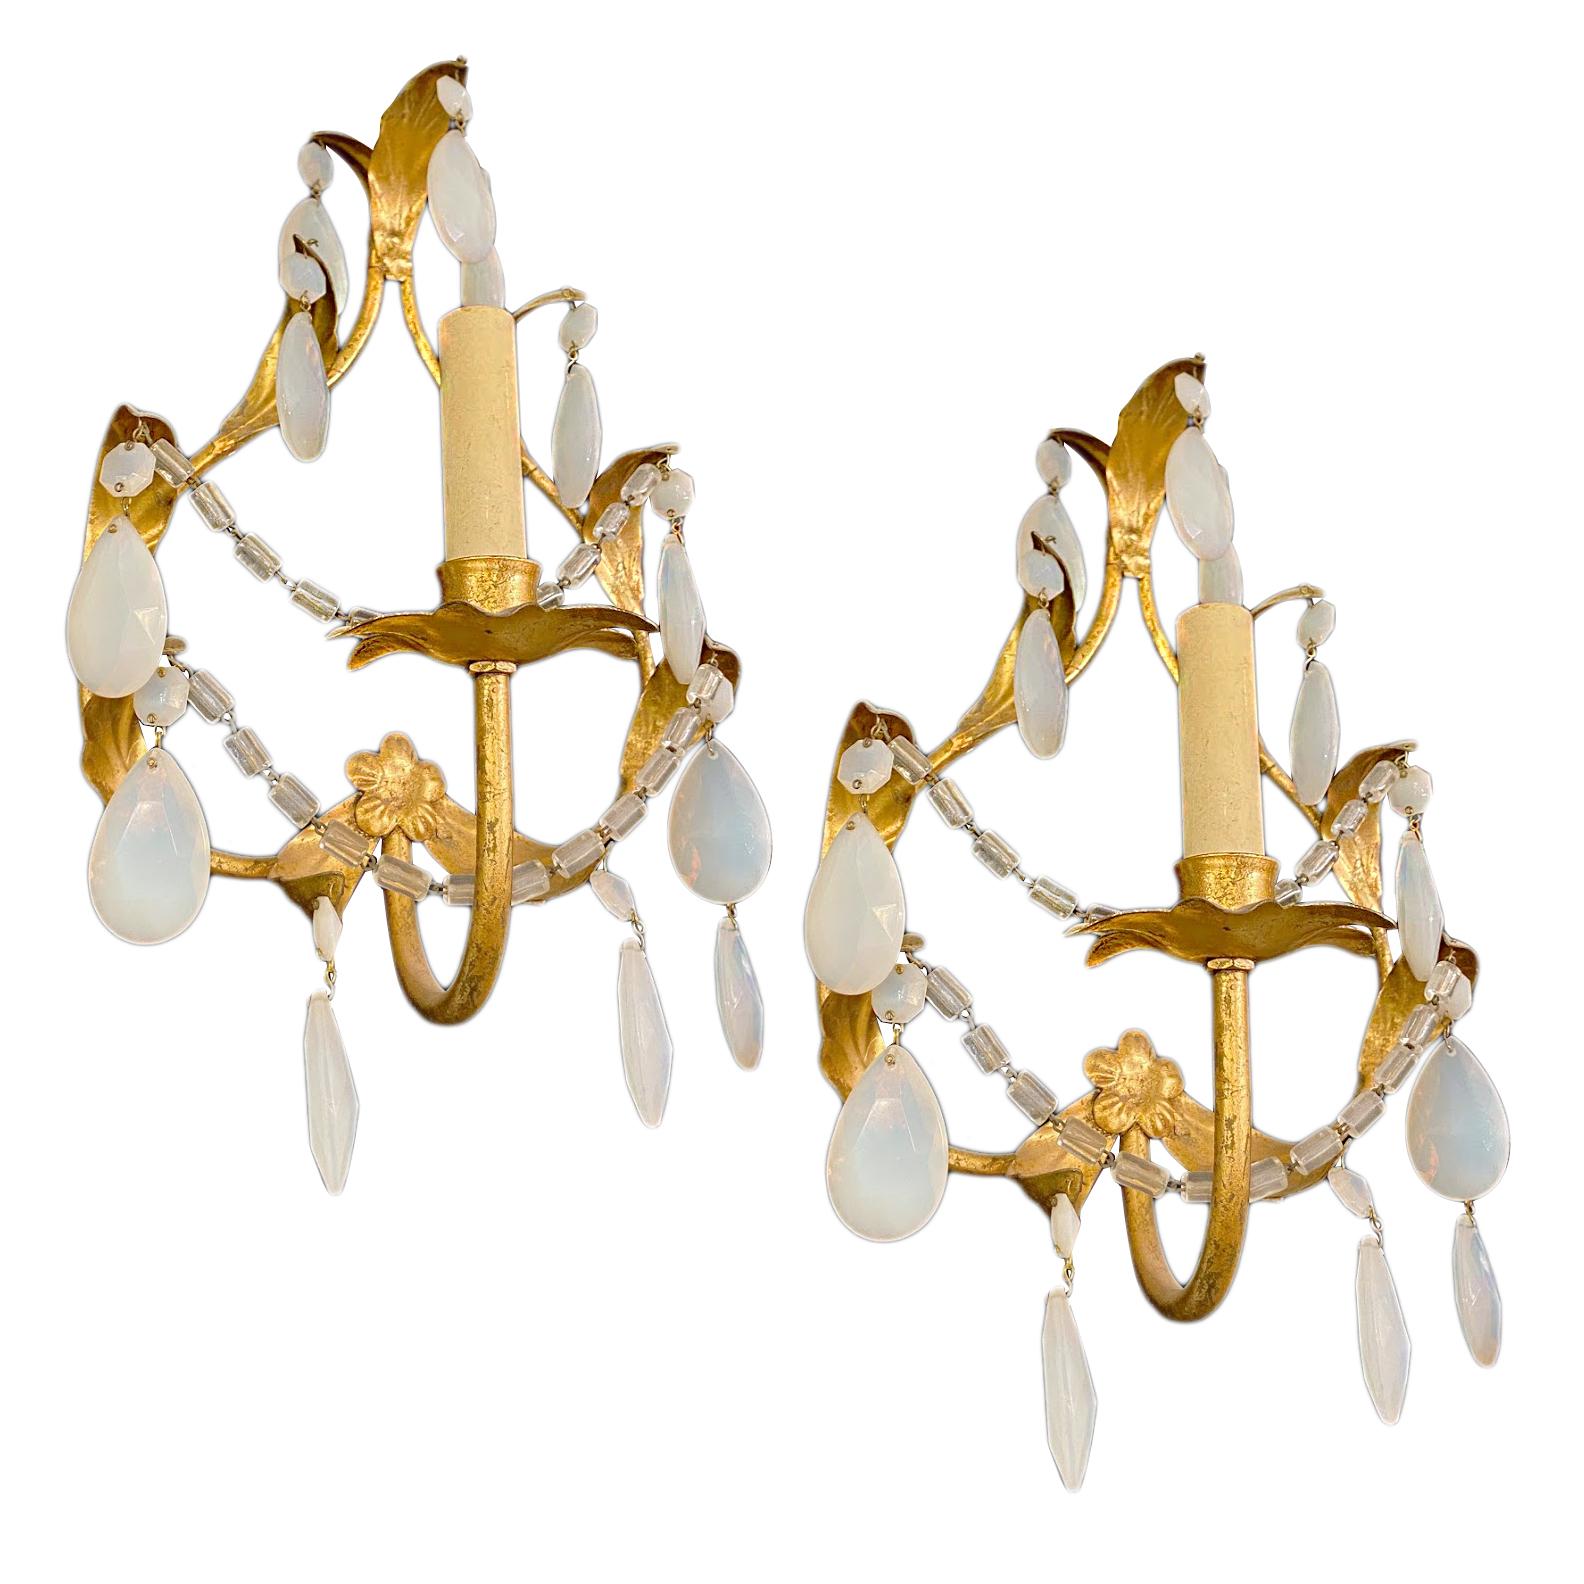 Pair of circa 1940's Italian gilt sconces with opaline glass pendants.

Measurements:
Height: 13